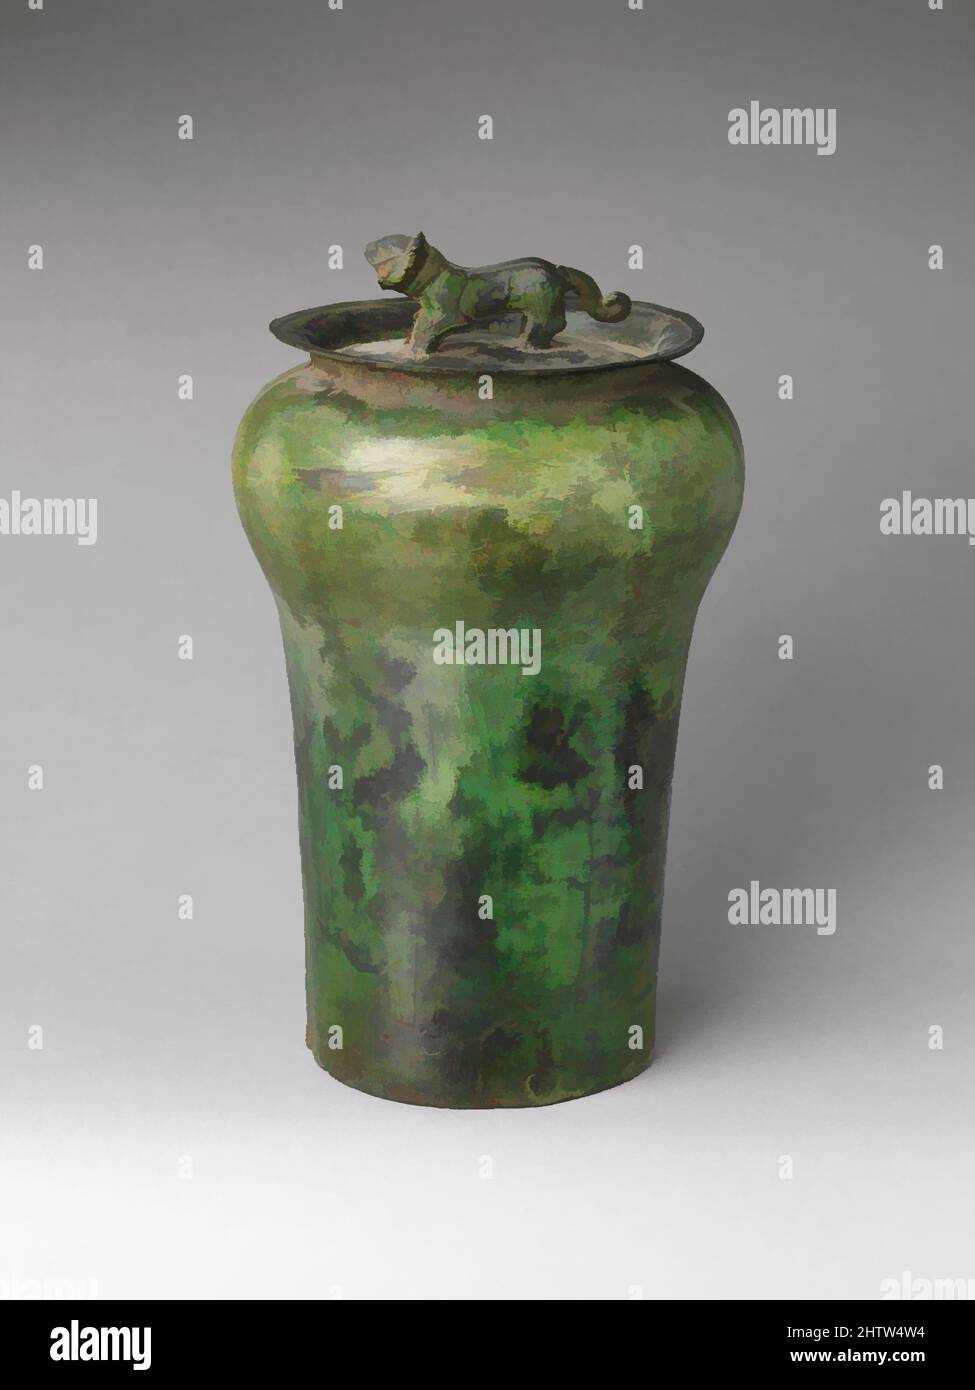 Art inspired by Bell (Zhun or Dui), Han dynasty (206 B.C.–A.D. 220), China, Bronze, H. 19 3/8 in. (49.2 cm); Diam. 11 5/8 in. (29.5 cm), Metalwork, Classic works modernized by Artotop with a splash of modernity. Shapes, color and value, eye-catching visual impact on art. Emotions through freedom of artworks in a contemporary way. A timeless message pursuing a wildly creative new direction. Artists turning to the digital medium and creating the Artotop NFT Stock Photo